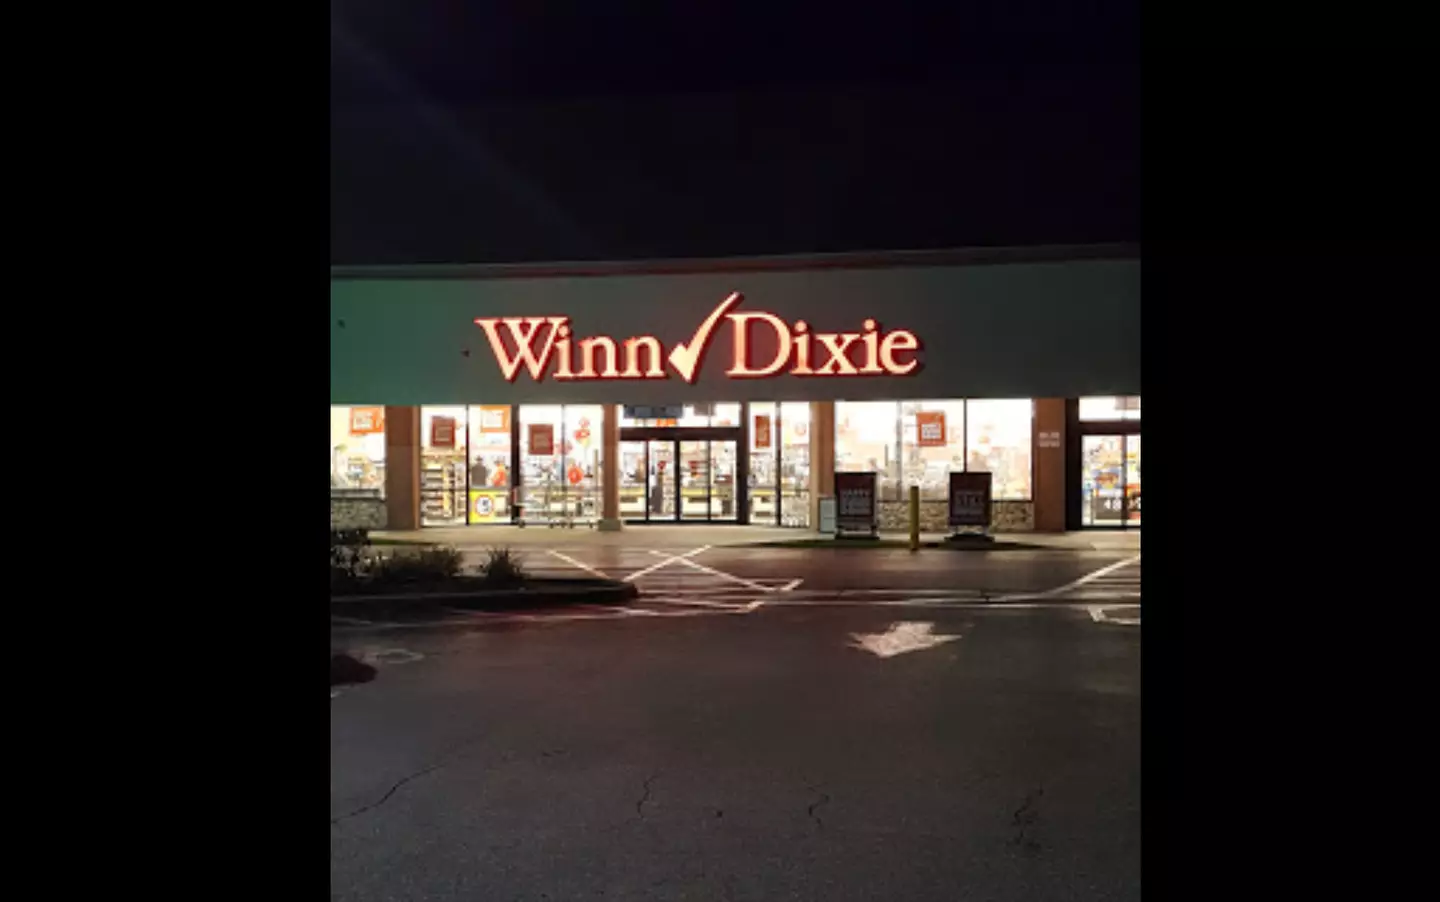 Kolb is alleged to have approached the mother and daughter at a Winn Dixie grocery store in Port Orange.